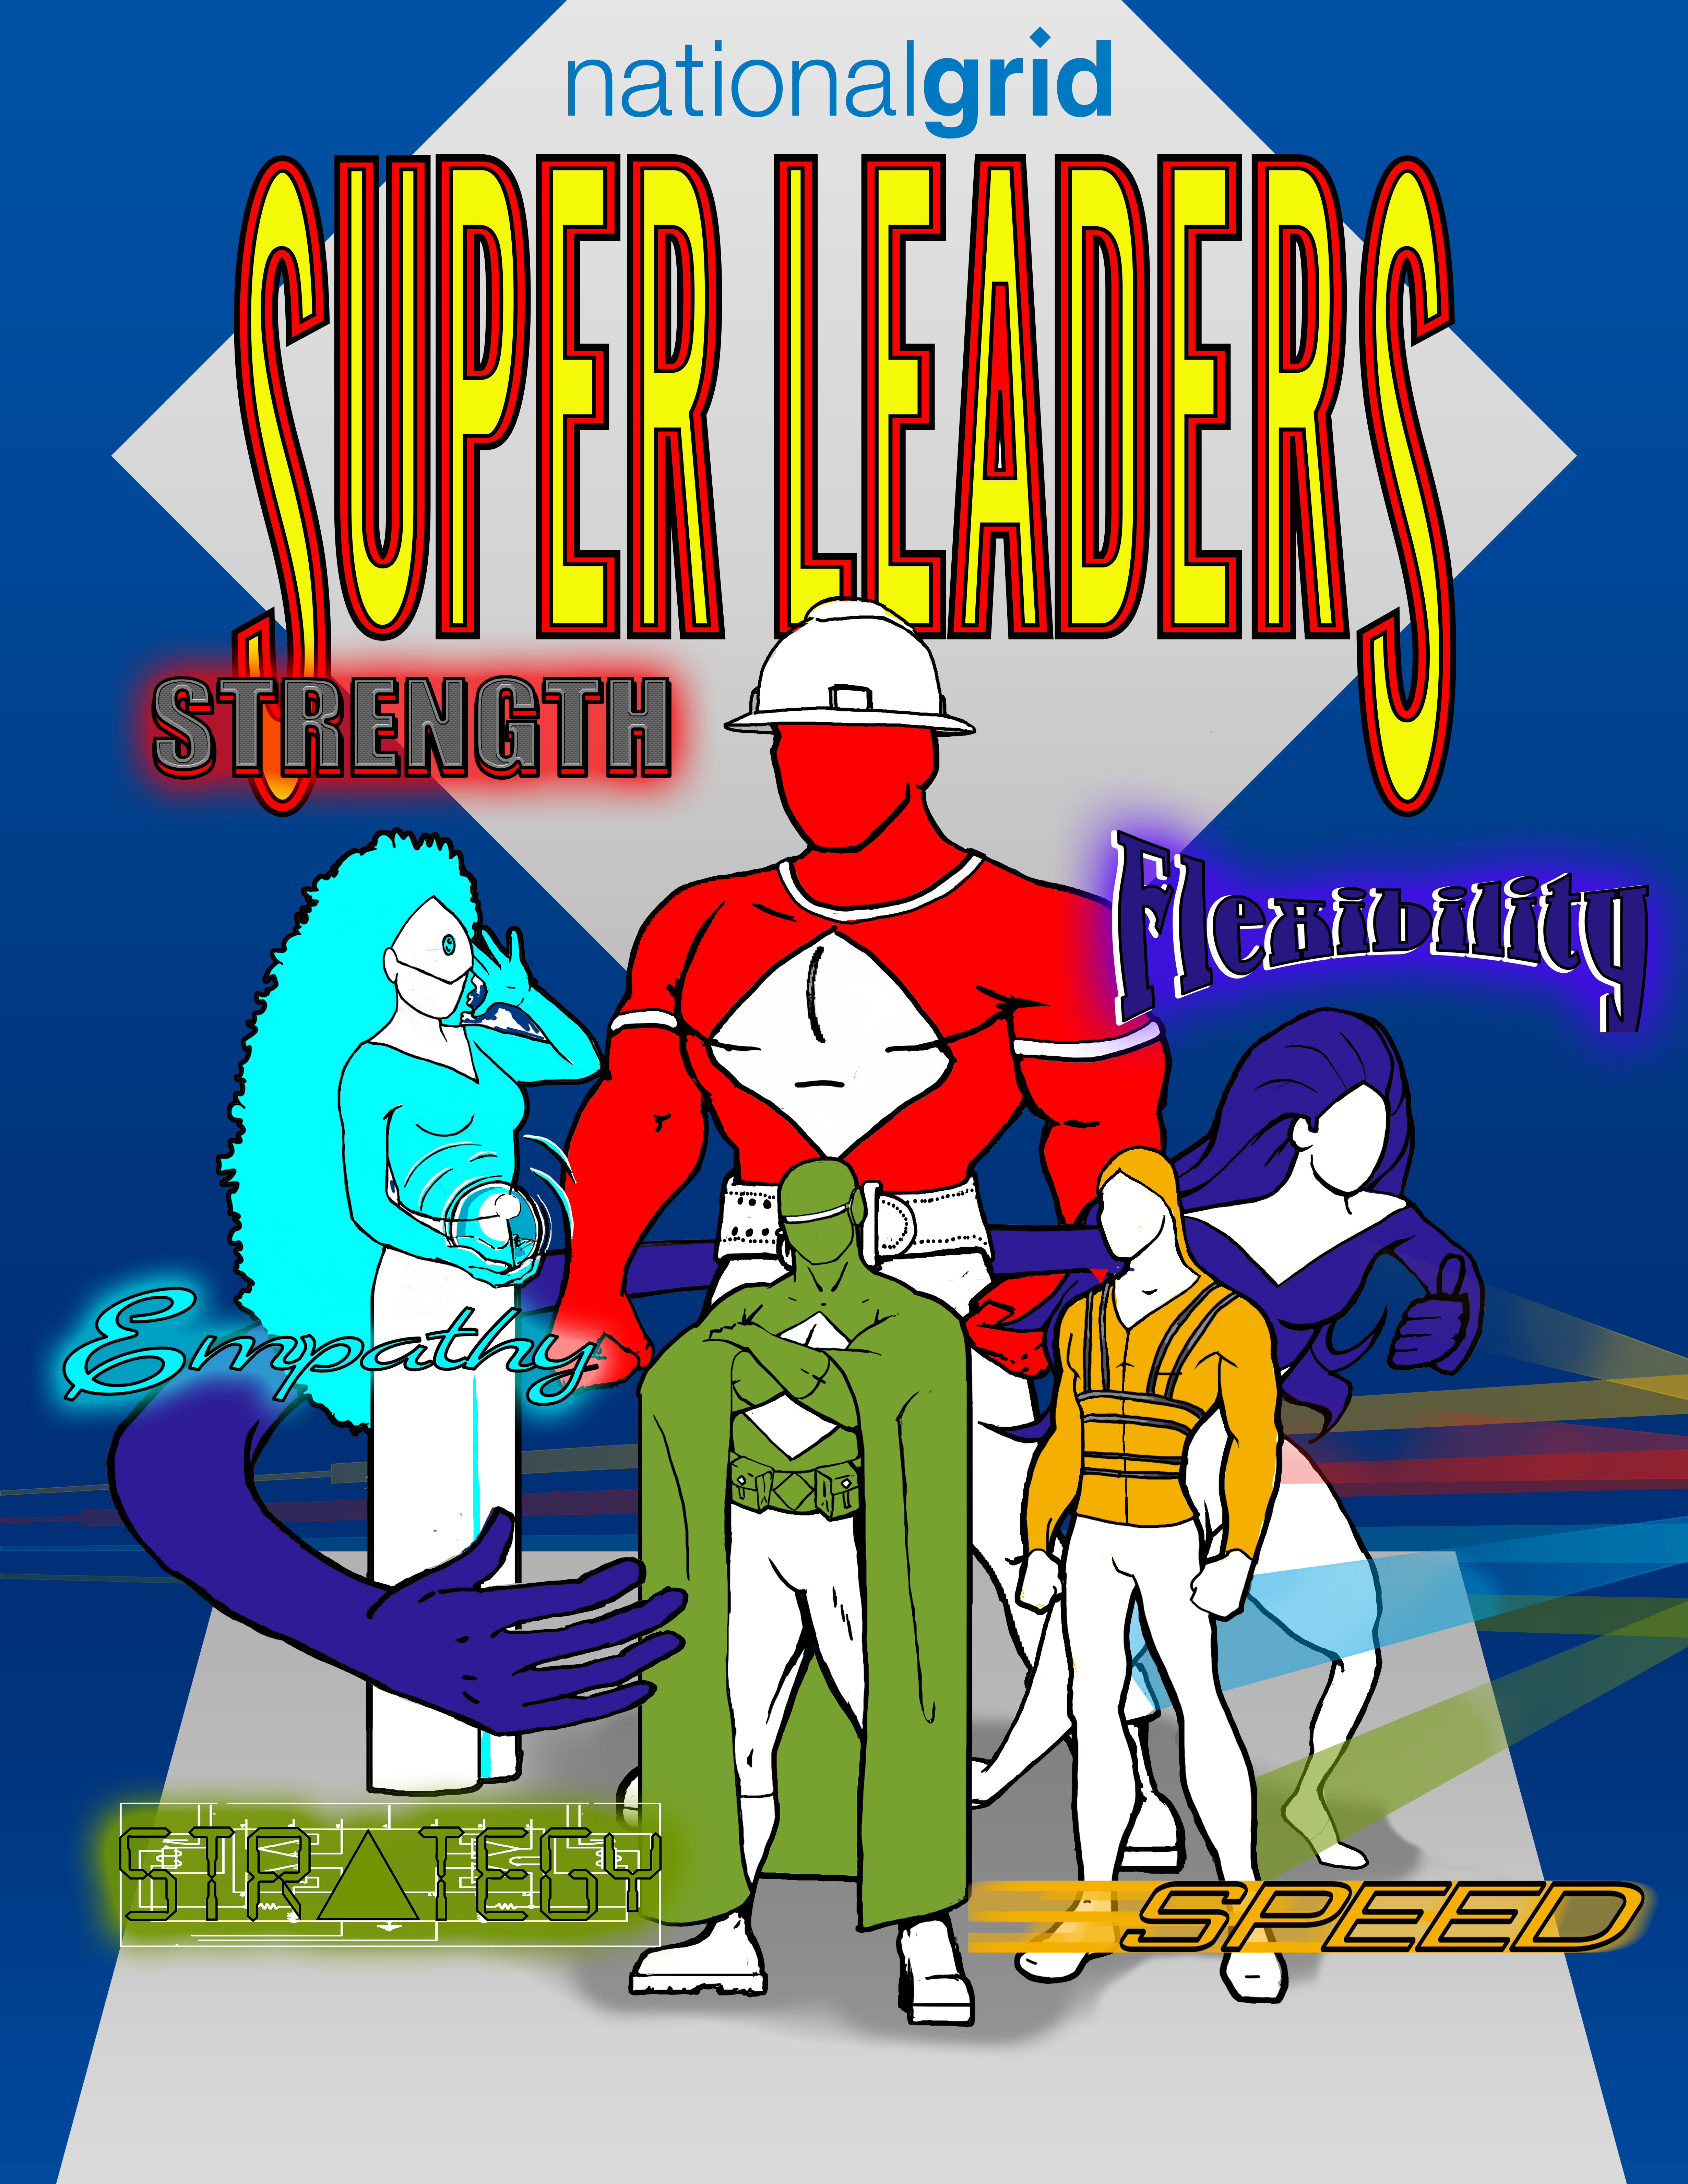 Super-Leaders characters